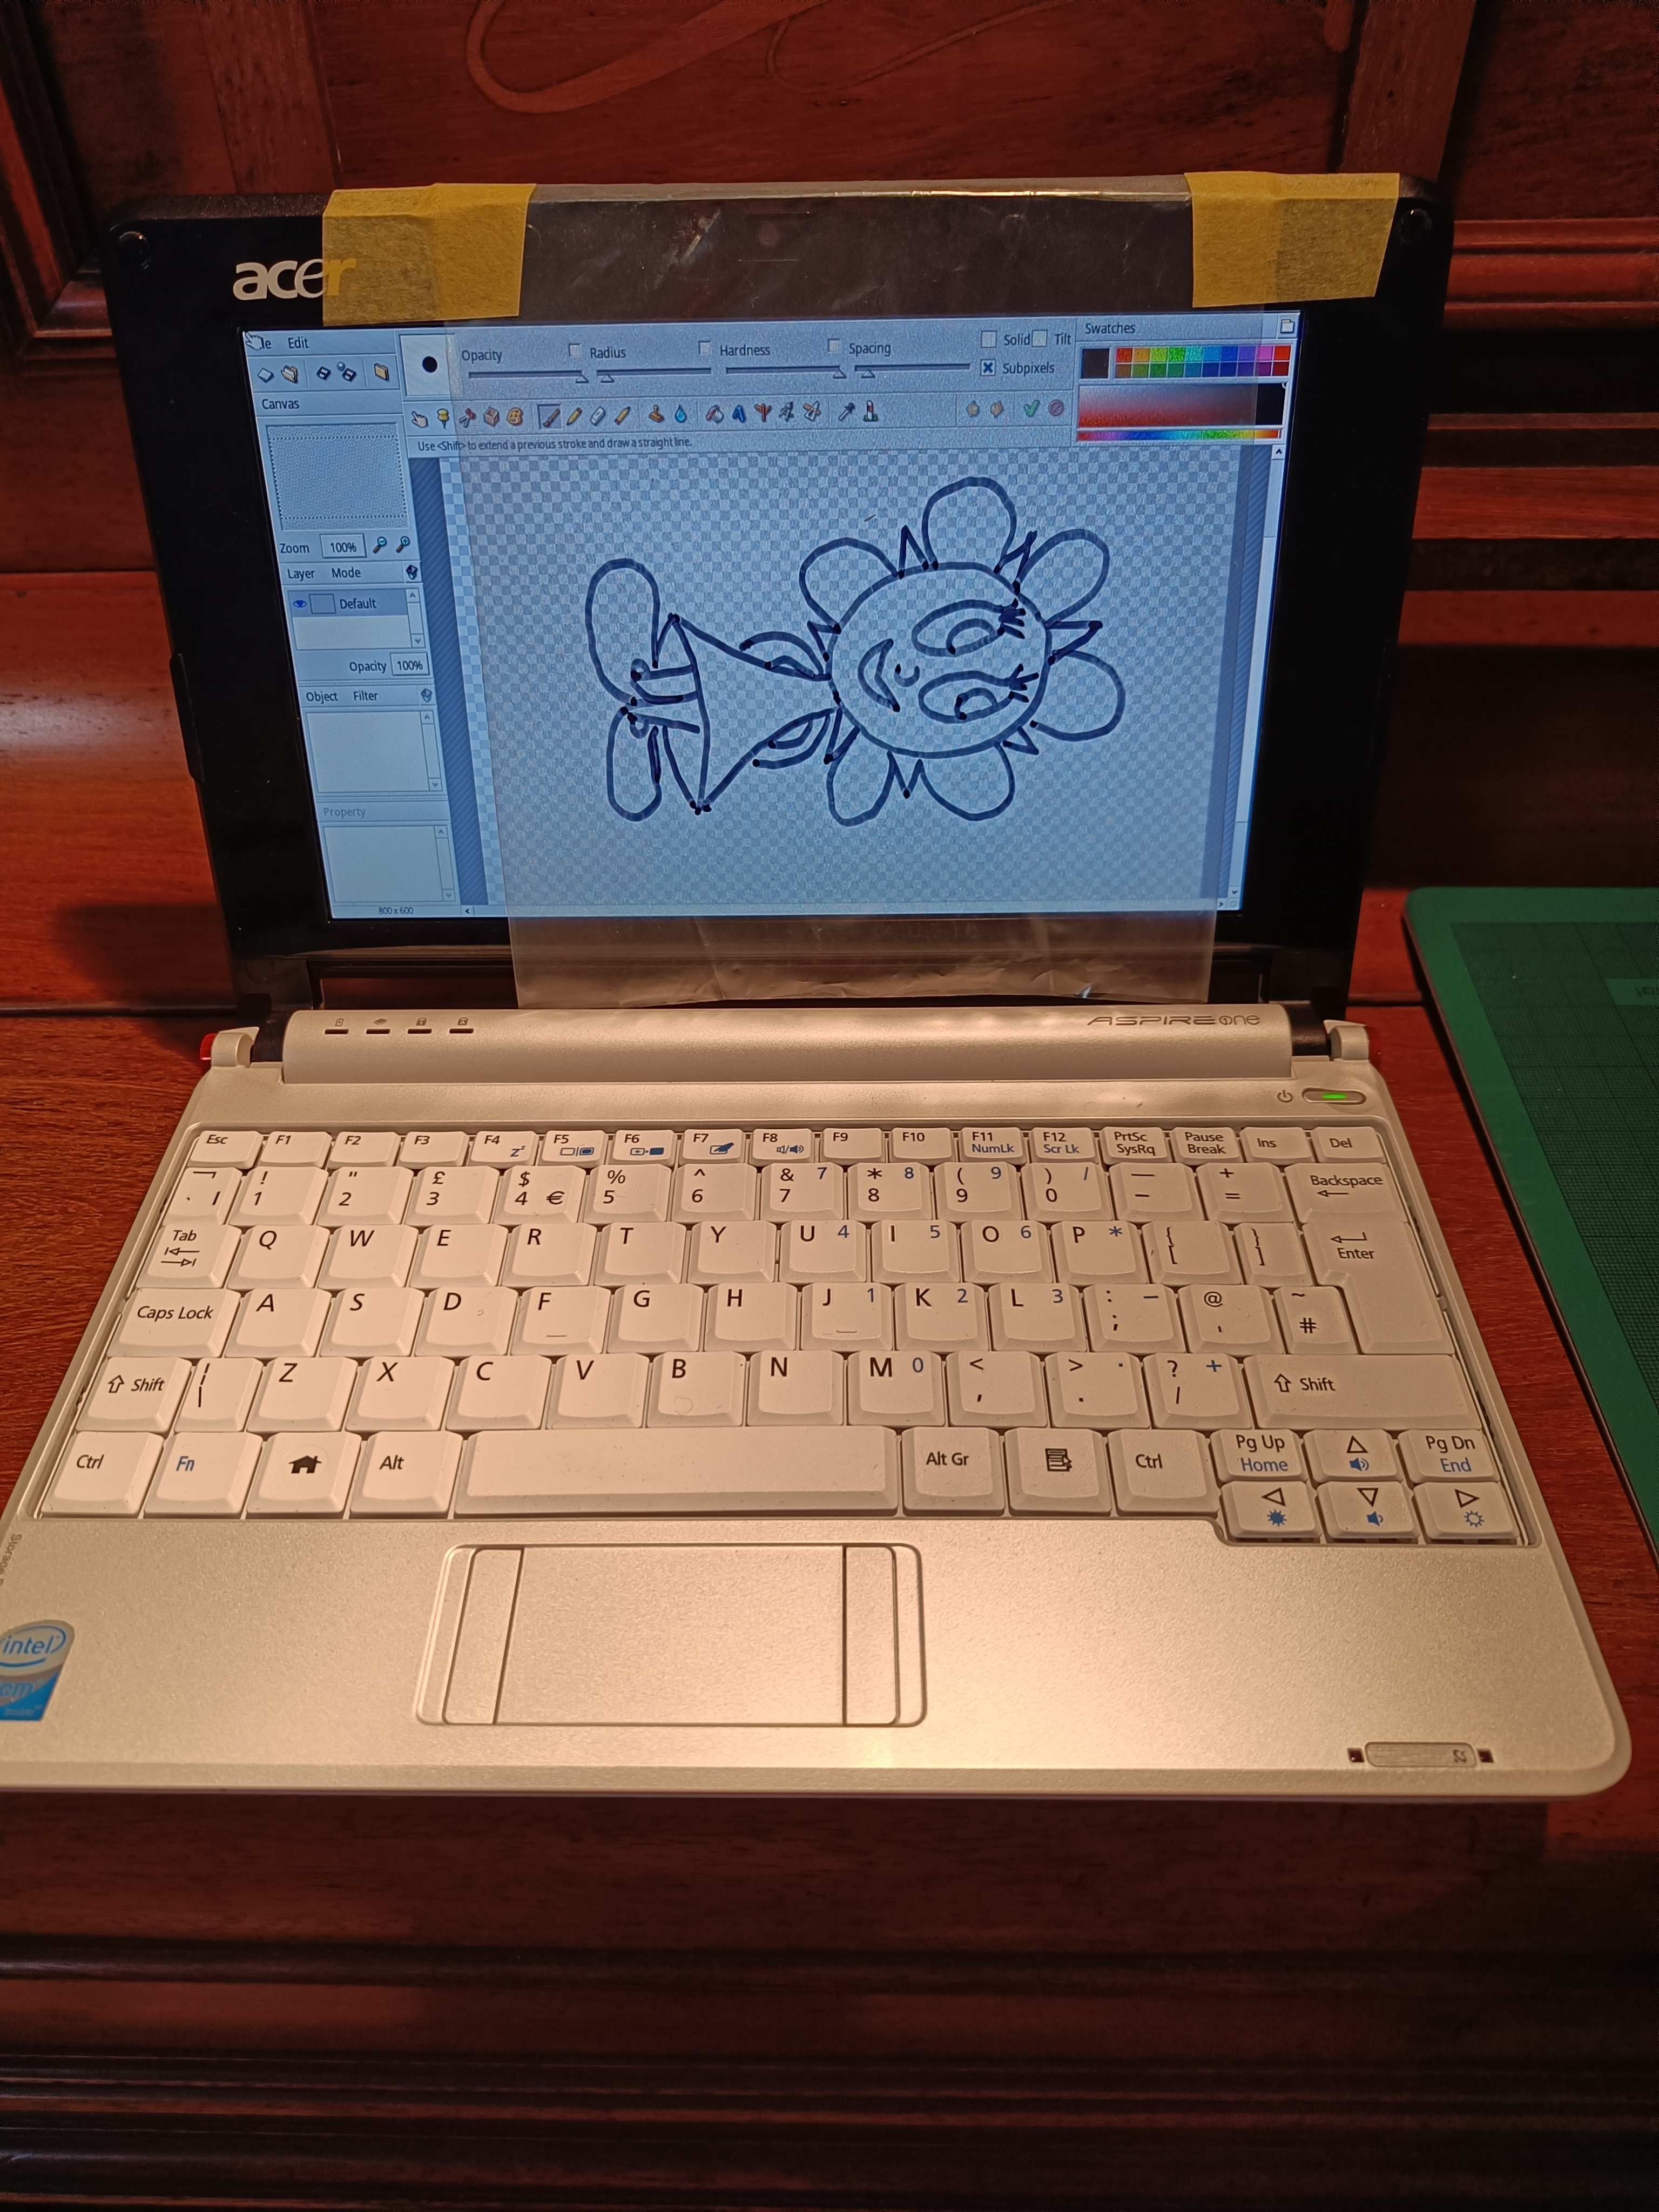 Piece of clear plastic taped to the screen of the small
netbook. On the plastic is a drawing of Sunny Funny done with a
sharpie. Sideways.